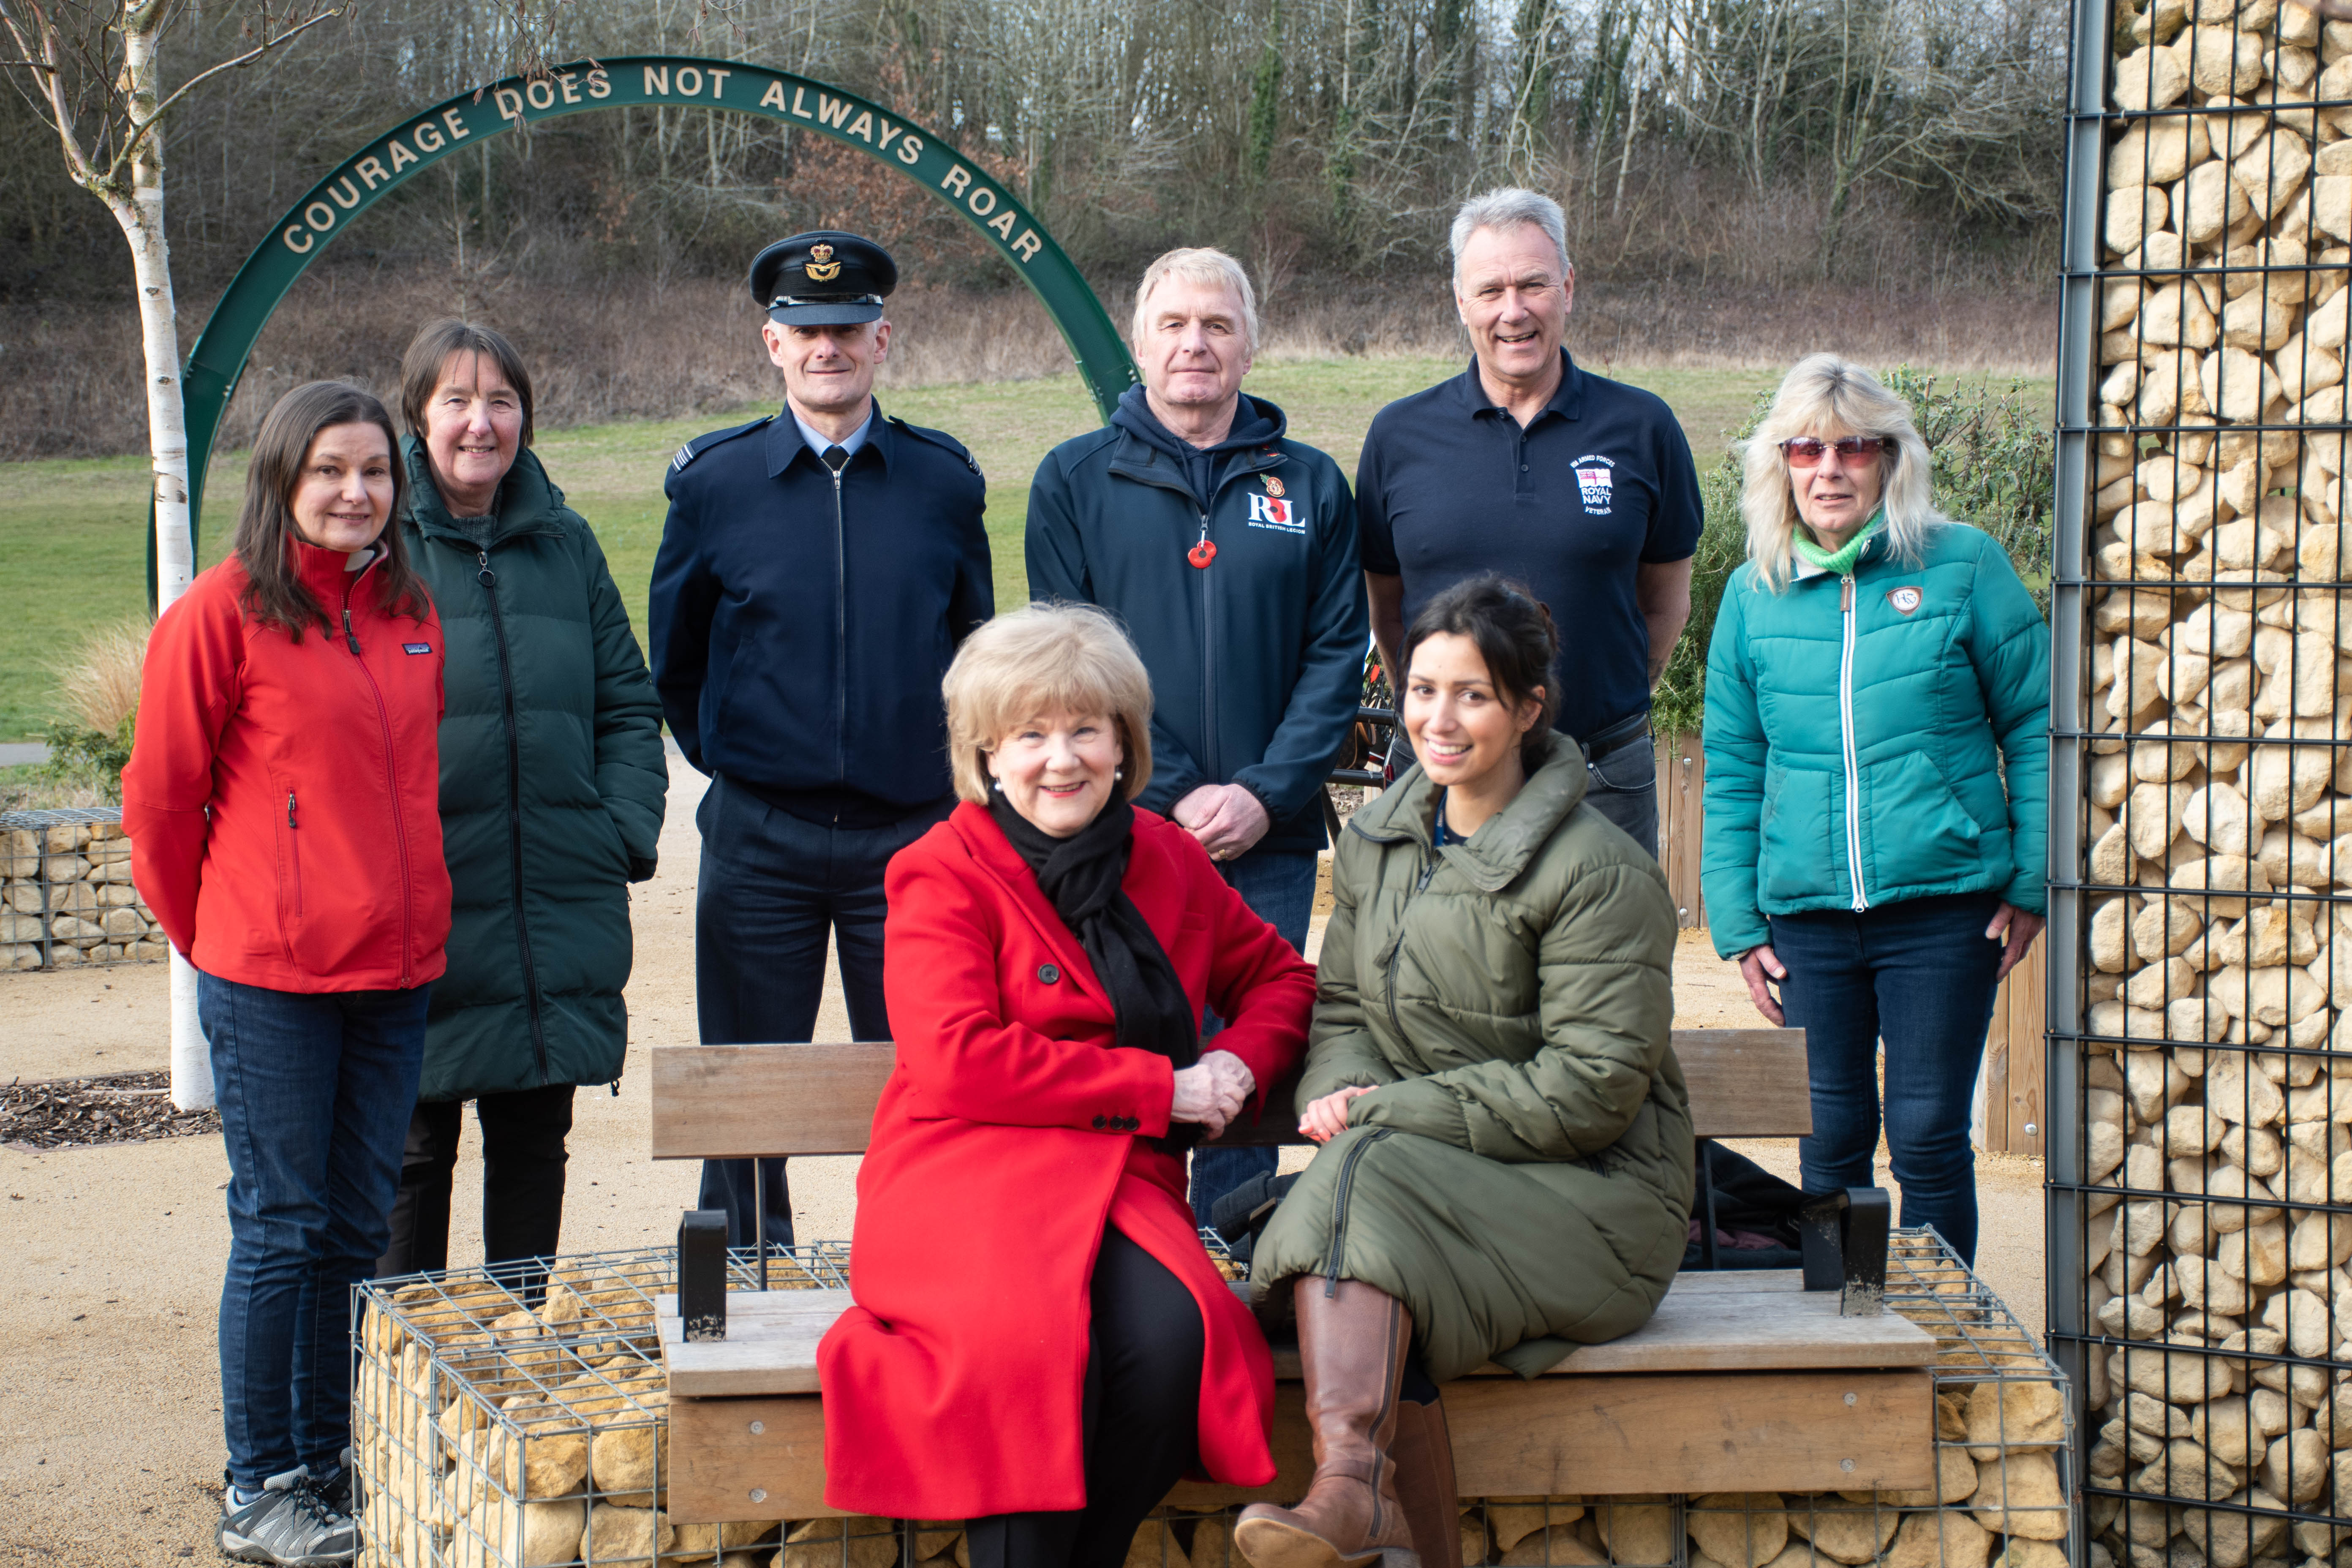 A group of people sitting in the Royal British Legion's Armed Forces Community Garden in Solihull.